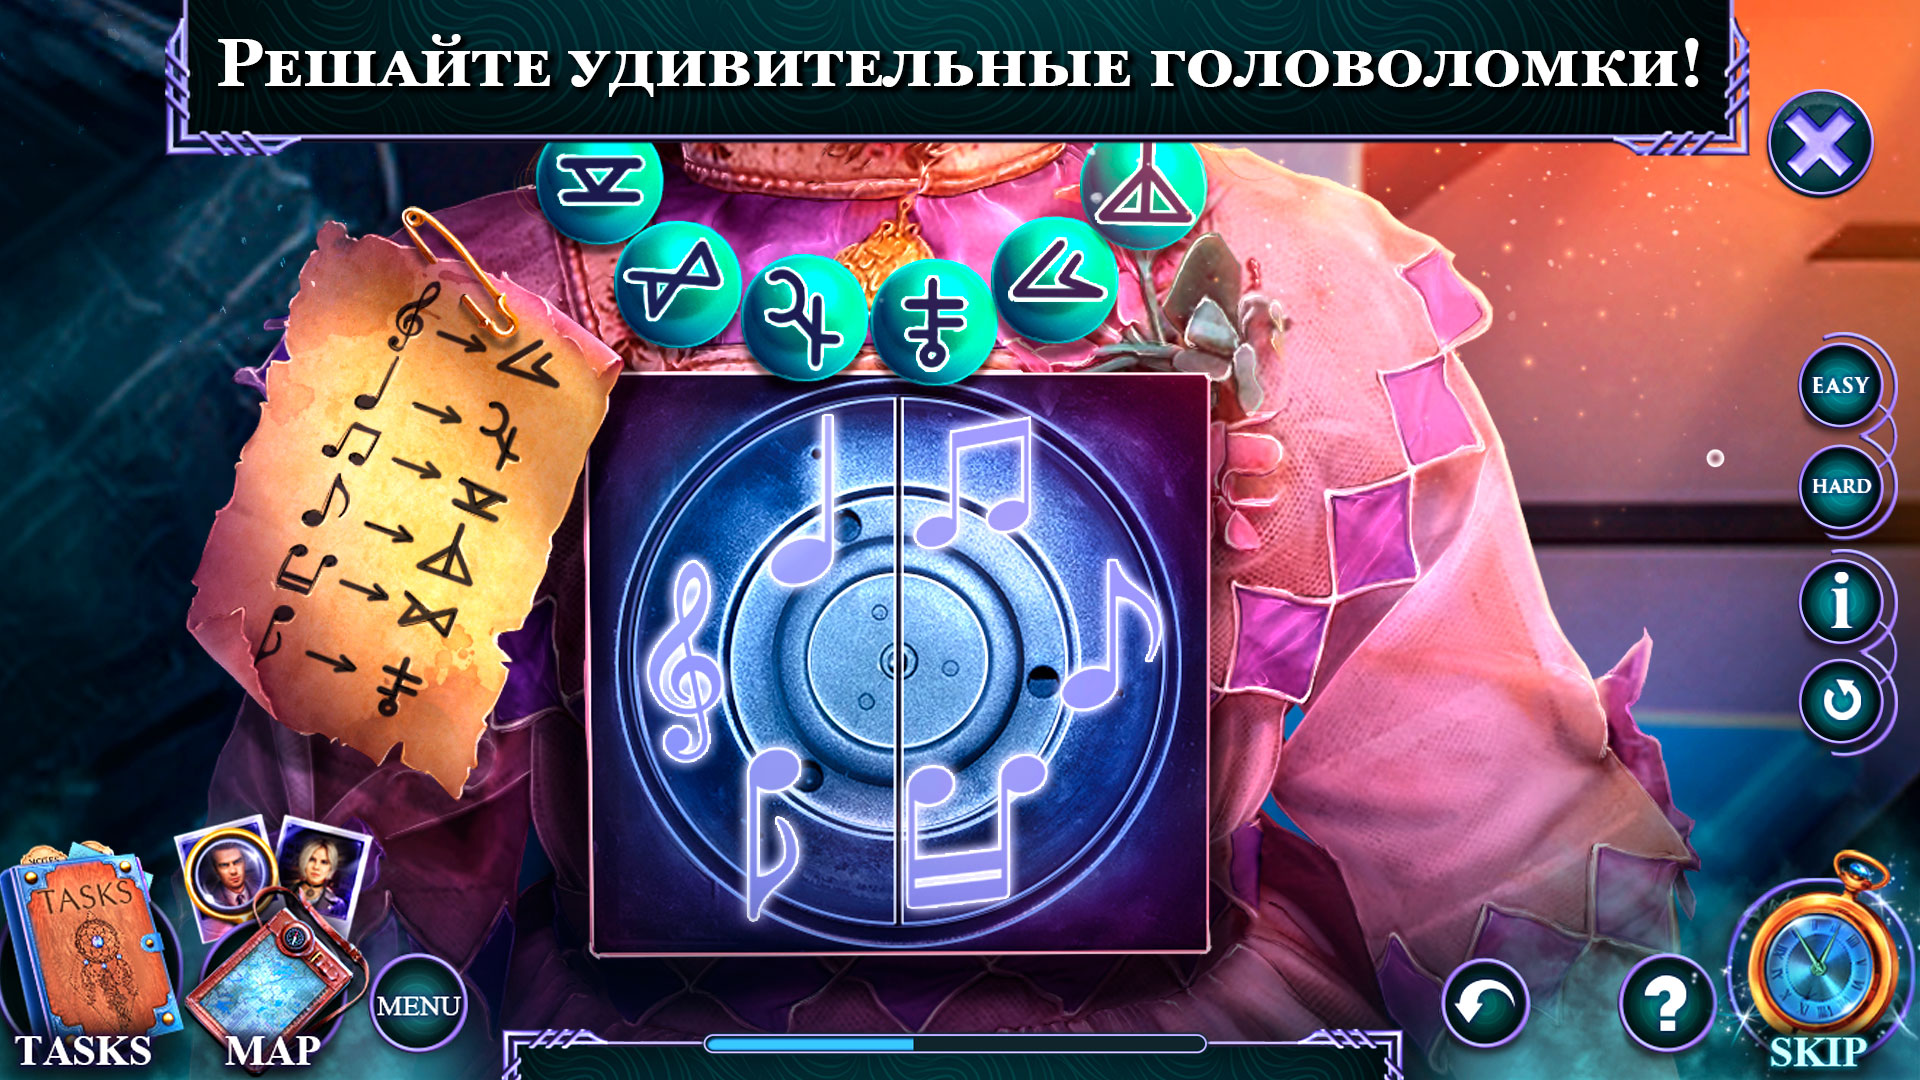 Gameplay of the Twin Mind: Power of Love for Android phone or tablet.